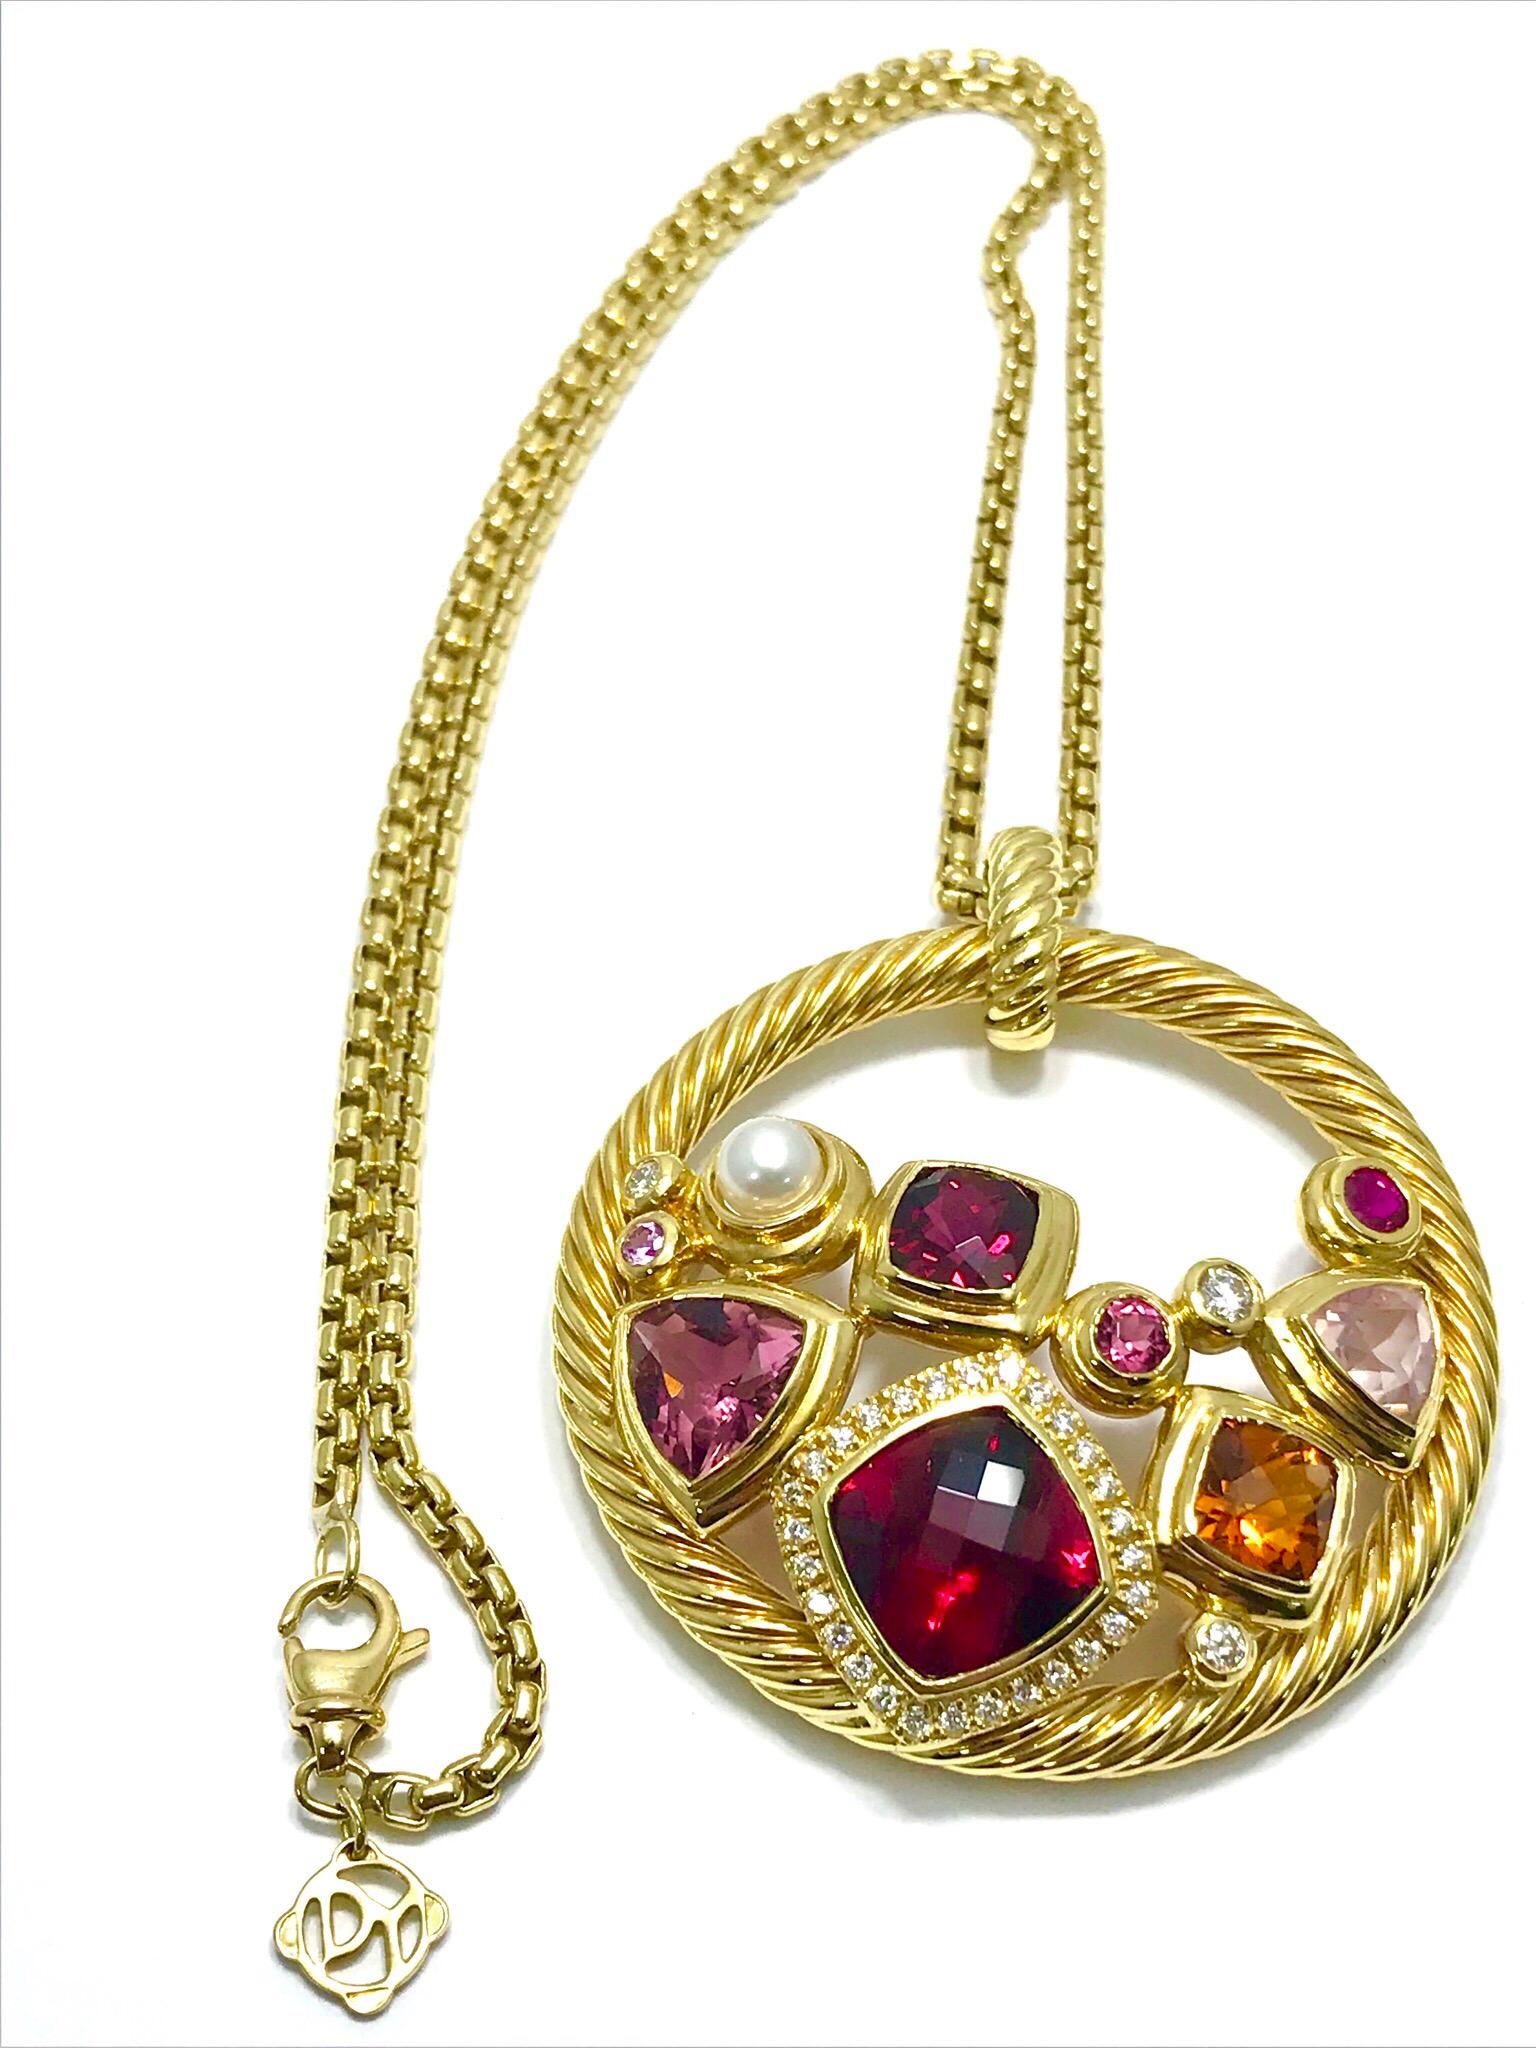 A gorgeous David Yurman Mosaic Diamond and multi gemstone 18 karat yellow gold pendant and chain.  The pendant contains 31 round brilliant Diamonds, with a total weight of 0.53 carats.  All of the gemstones are bezel set, consisting of Rubelite